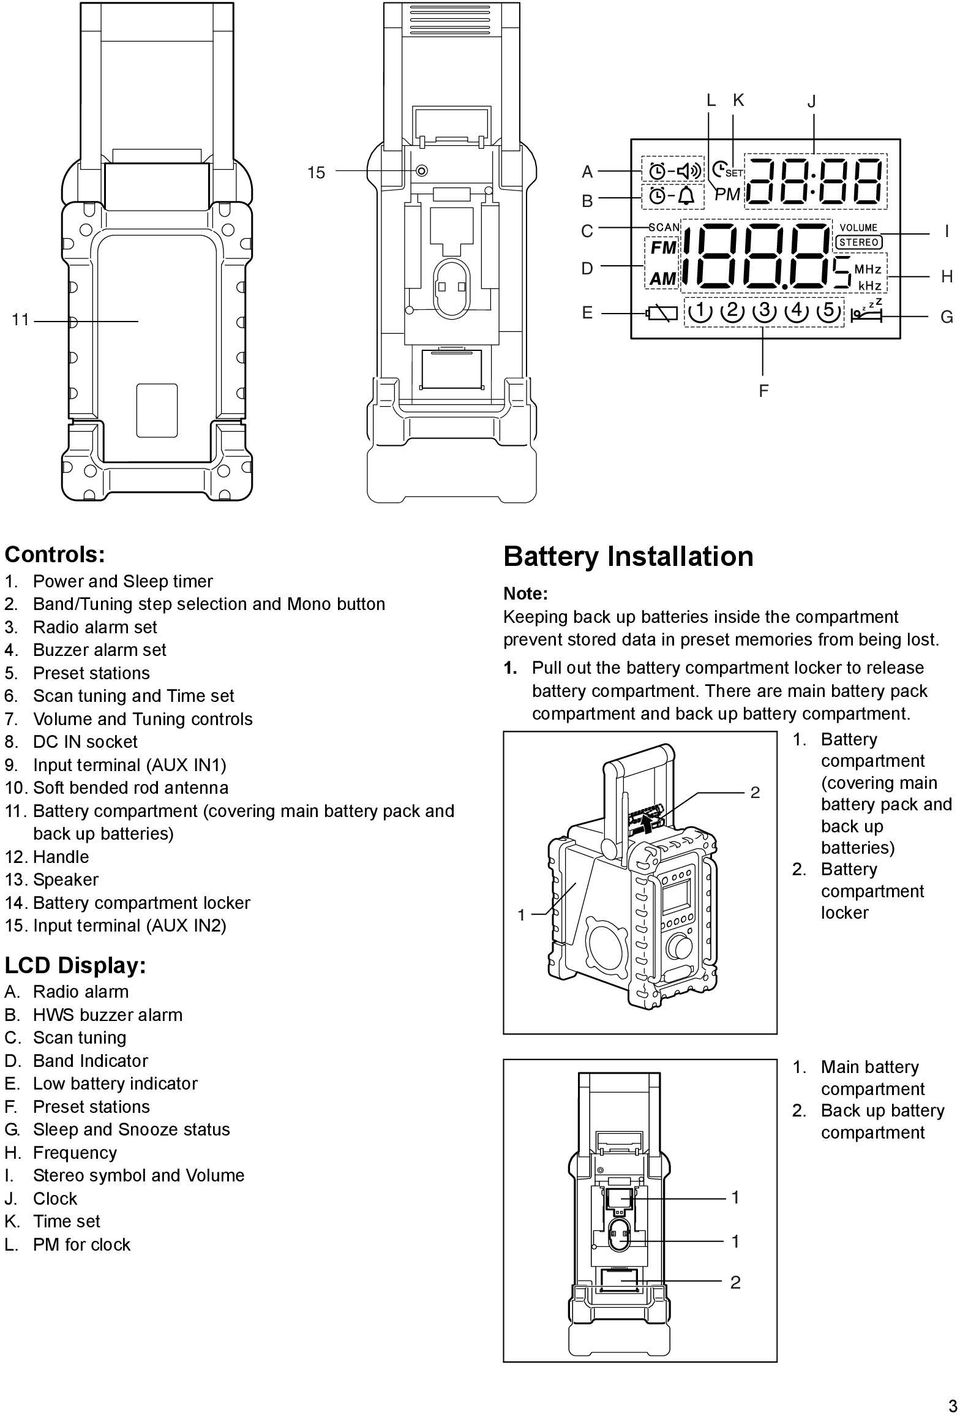 Battery compartment locker 5. Input terminal (AUX IN) Battery Installation Keeping back up batteries inside the compartment prevent stored data in preset memories from being lost.